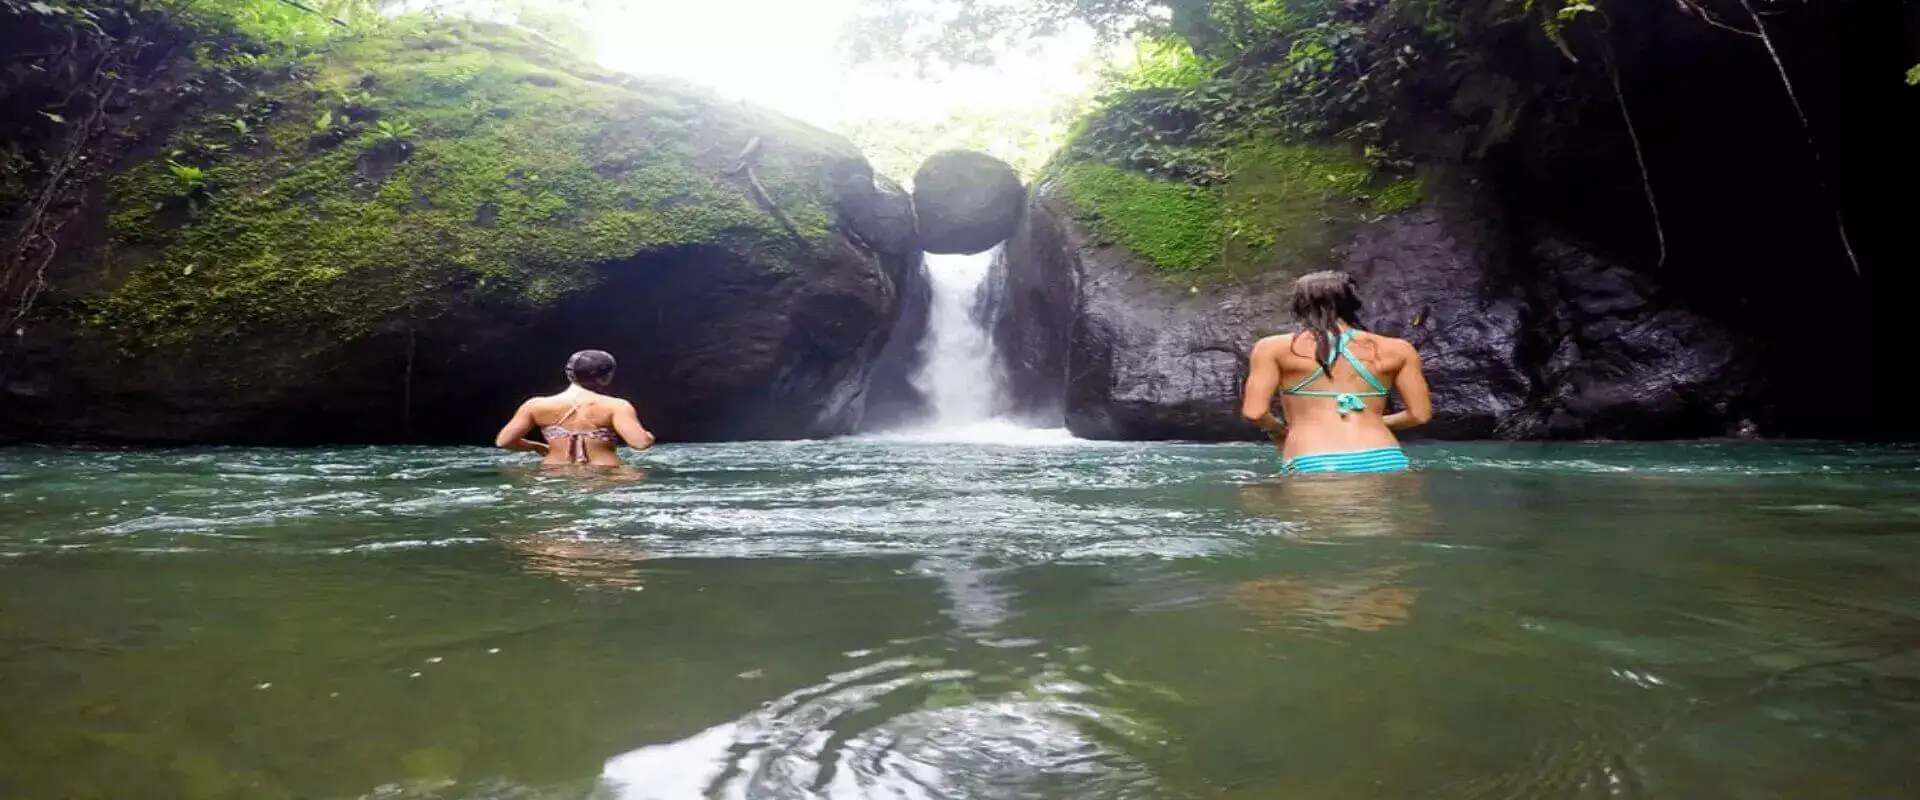 Waterfalls Expedition | Costa Rica